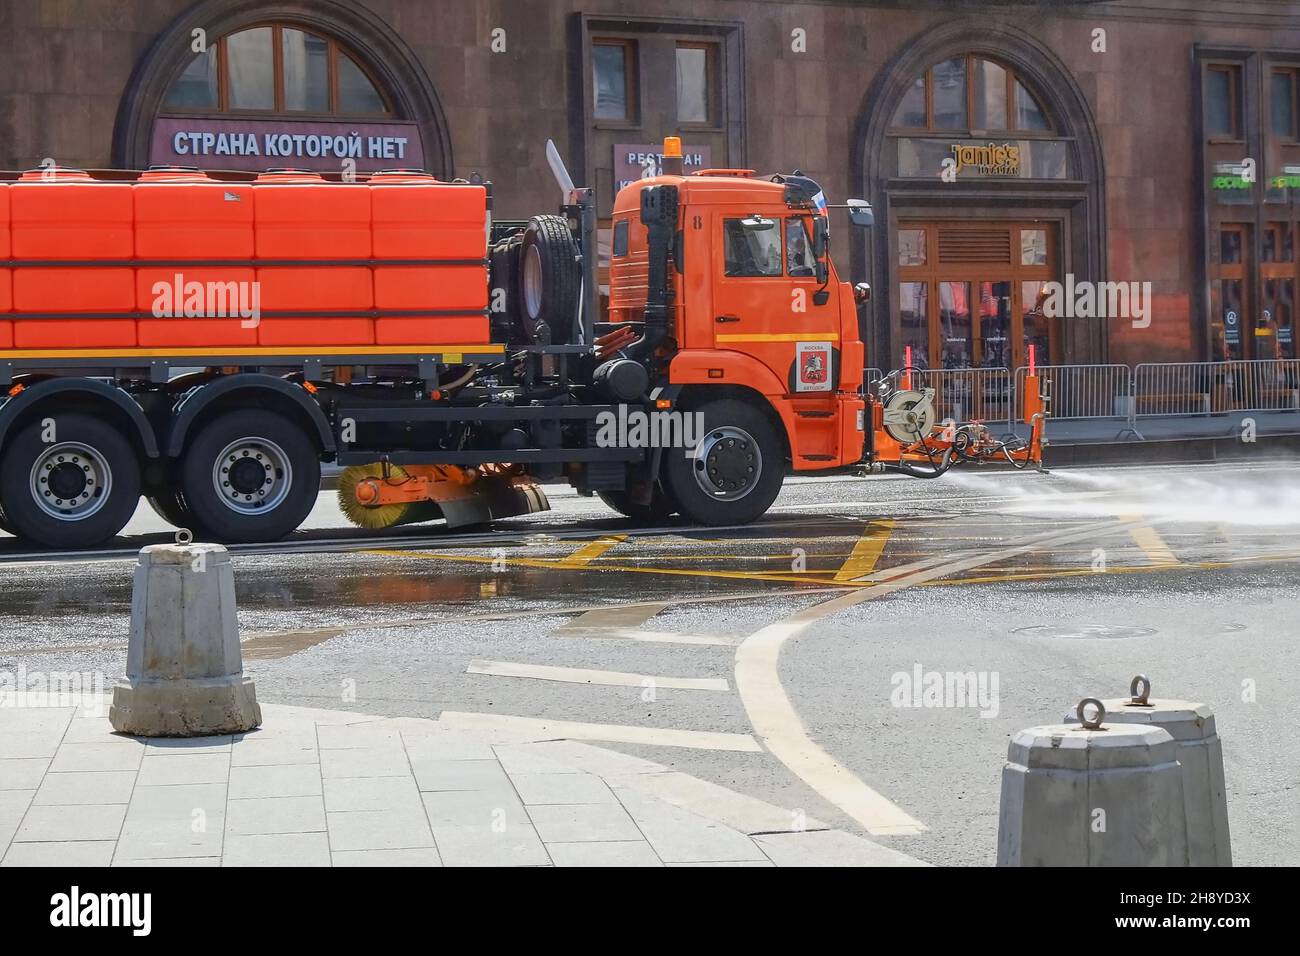 Municipal watering machine washes and spray water on asphalt of Moscow city center streets .Urban public utilities  Stock Photo